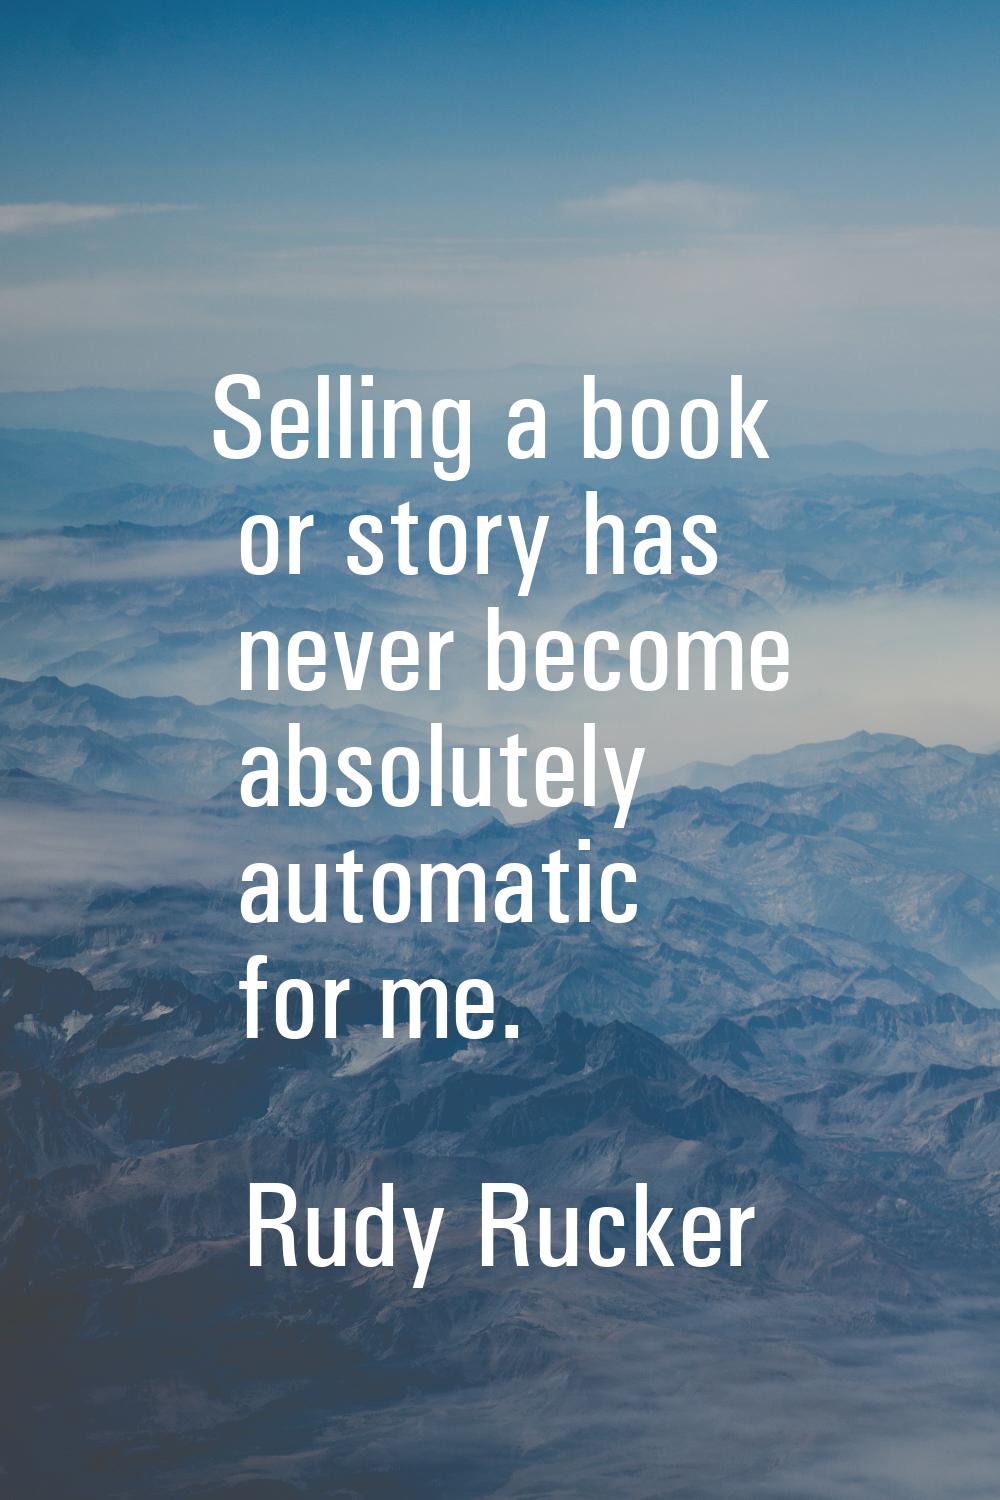 Selling a book or story has never become absolutely automatic for me.